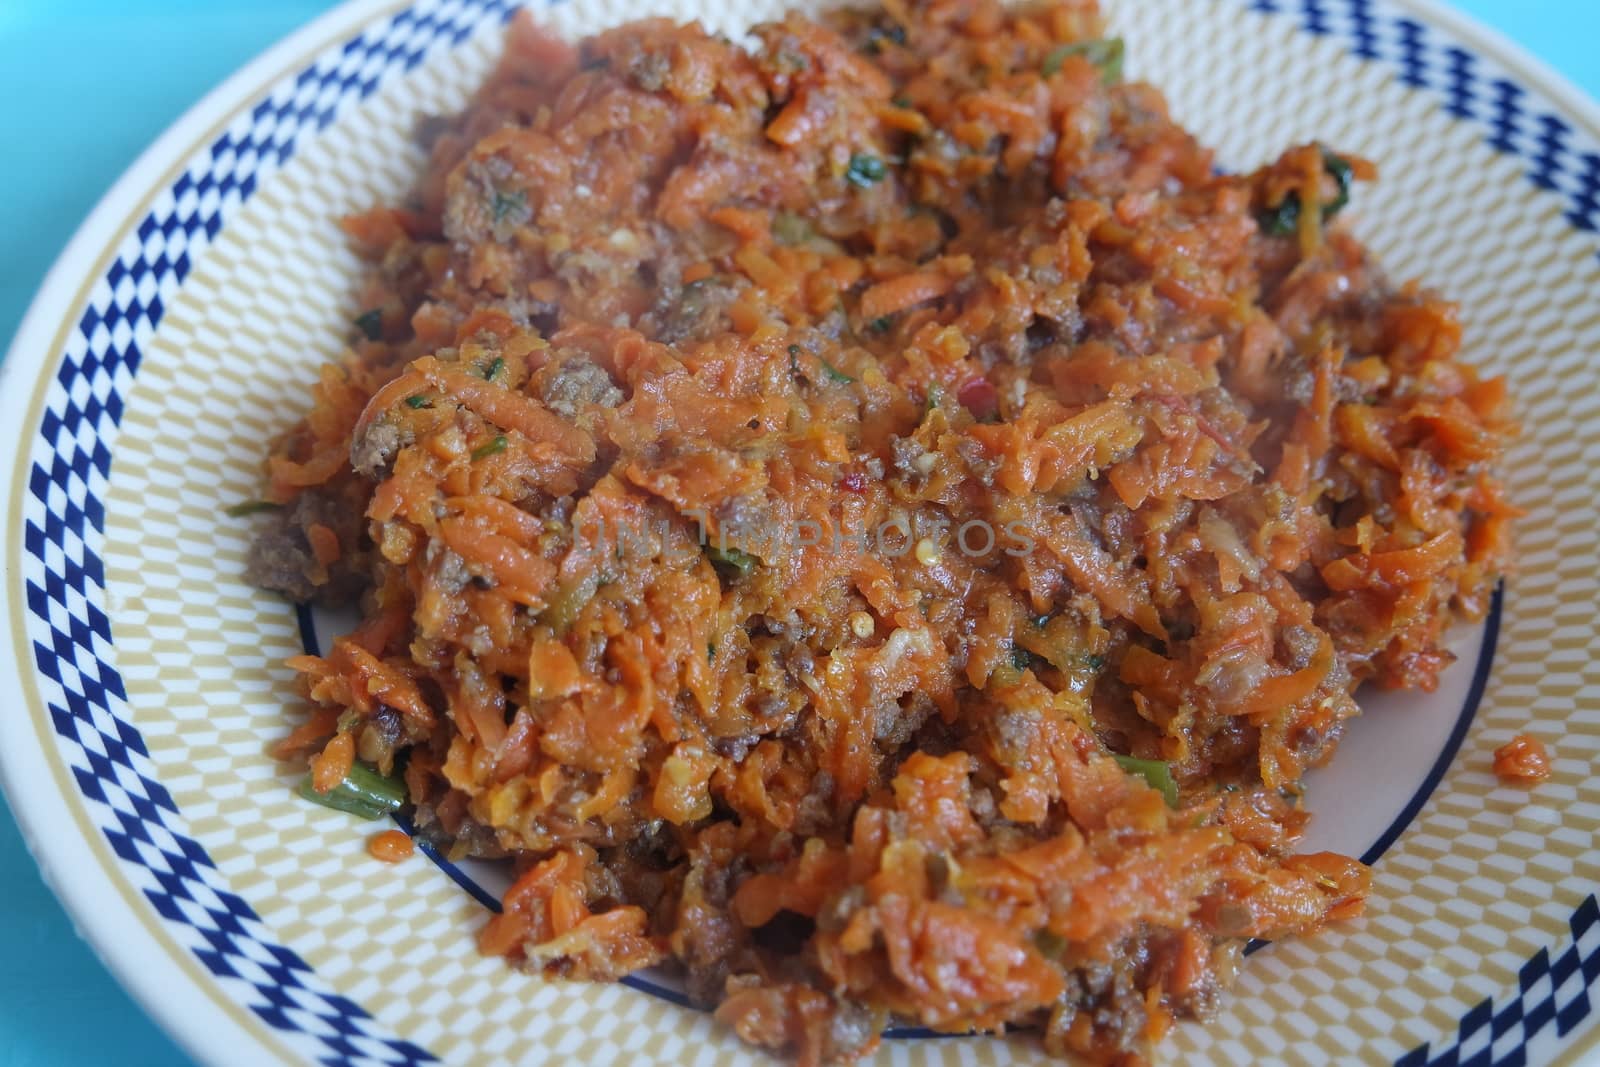 Top closeup view of a homemade dish made from carrot and vegetables served in a ceramic plate.